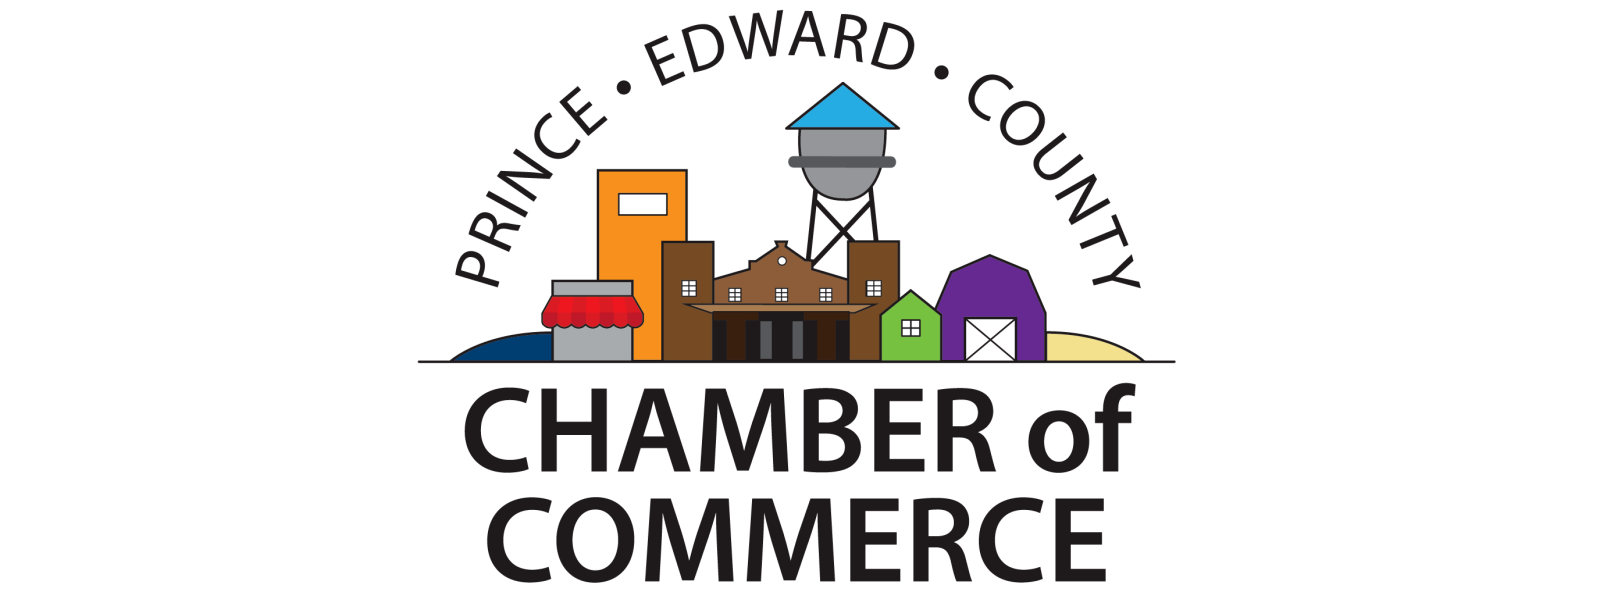 Prince Edward County Chamber of Commerce